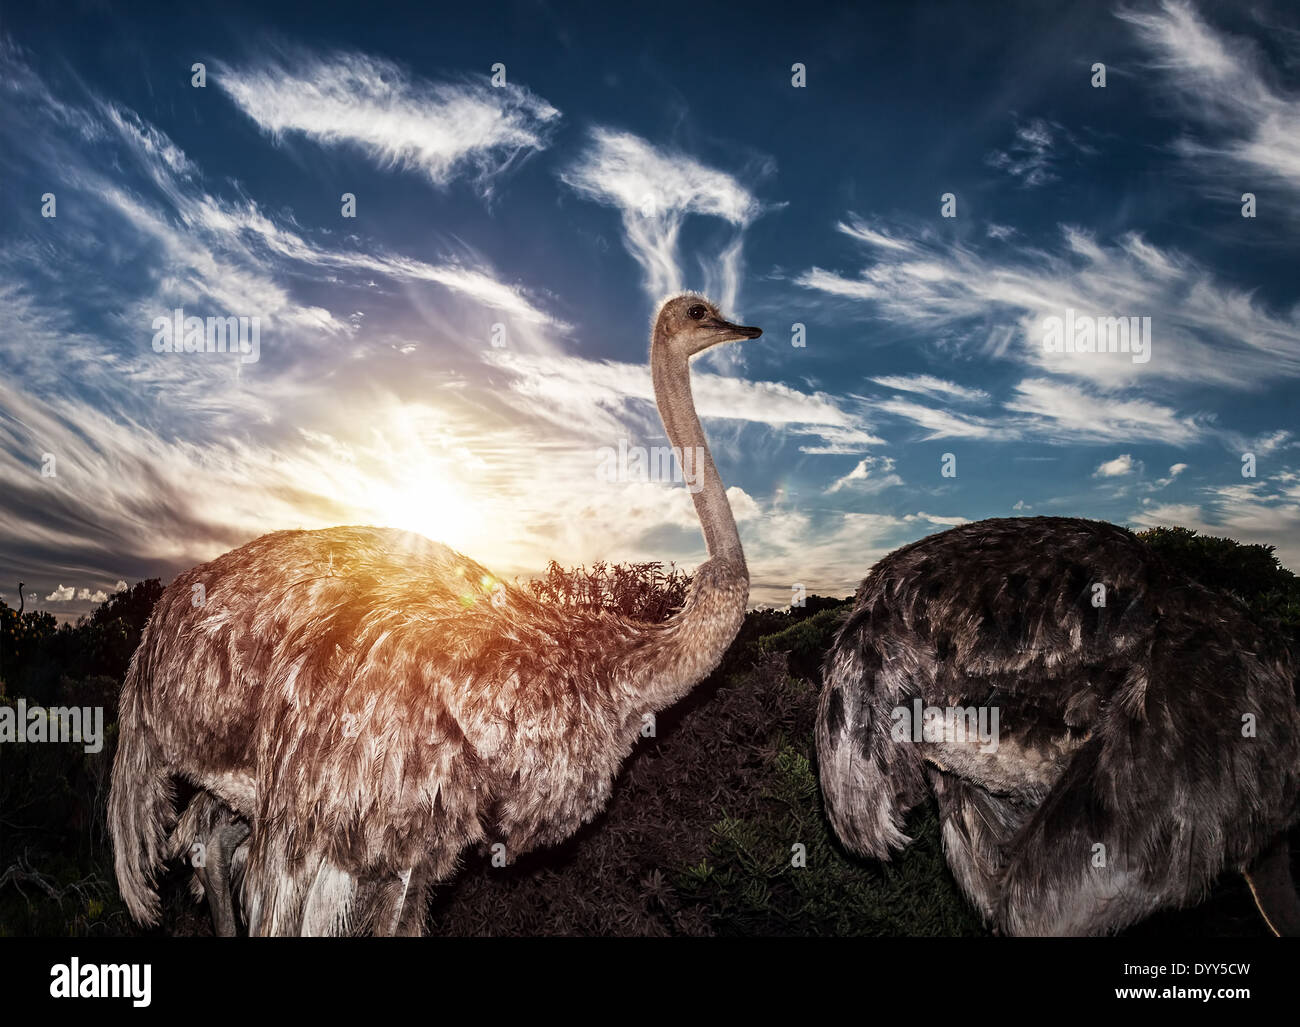 Ostriches in wild nature, wildlife of South Africa, beautiful big birds in sunset lights, national park, travel and tourism Stock Photo